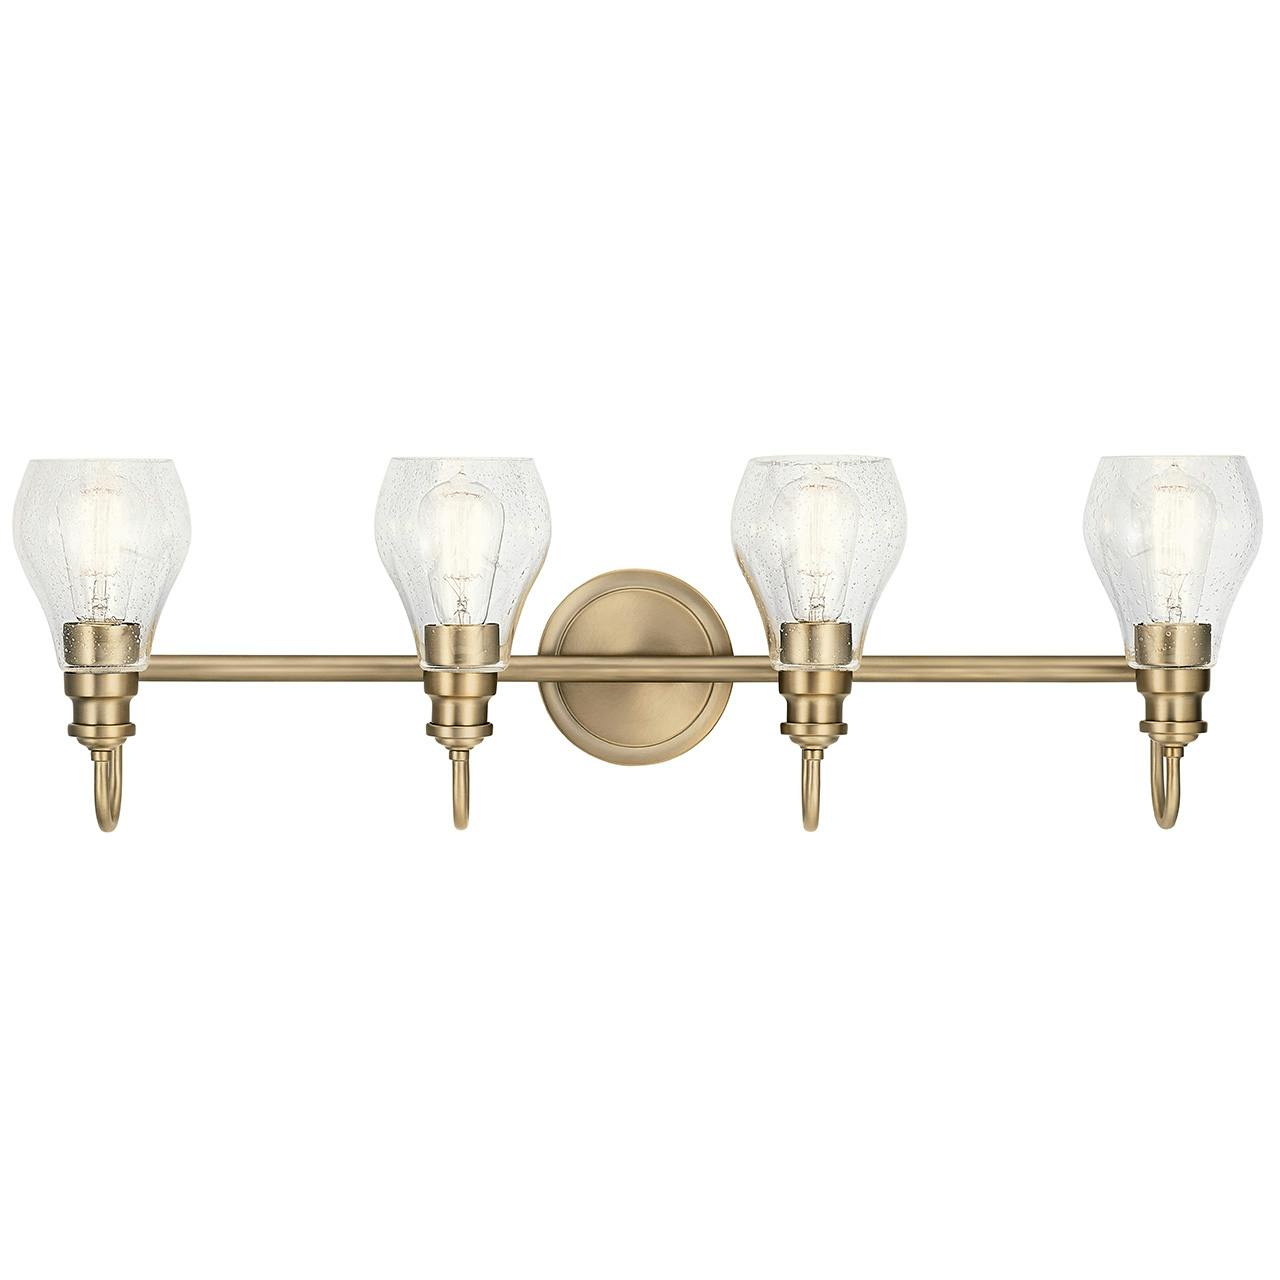 The Greenbrier 4 Light Vanity Light Bronze facing up on a white background